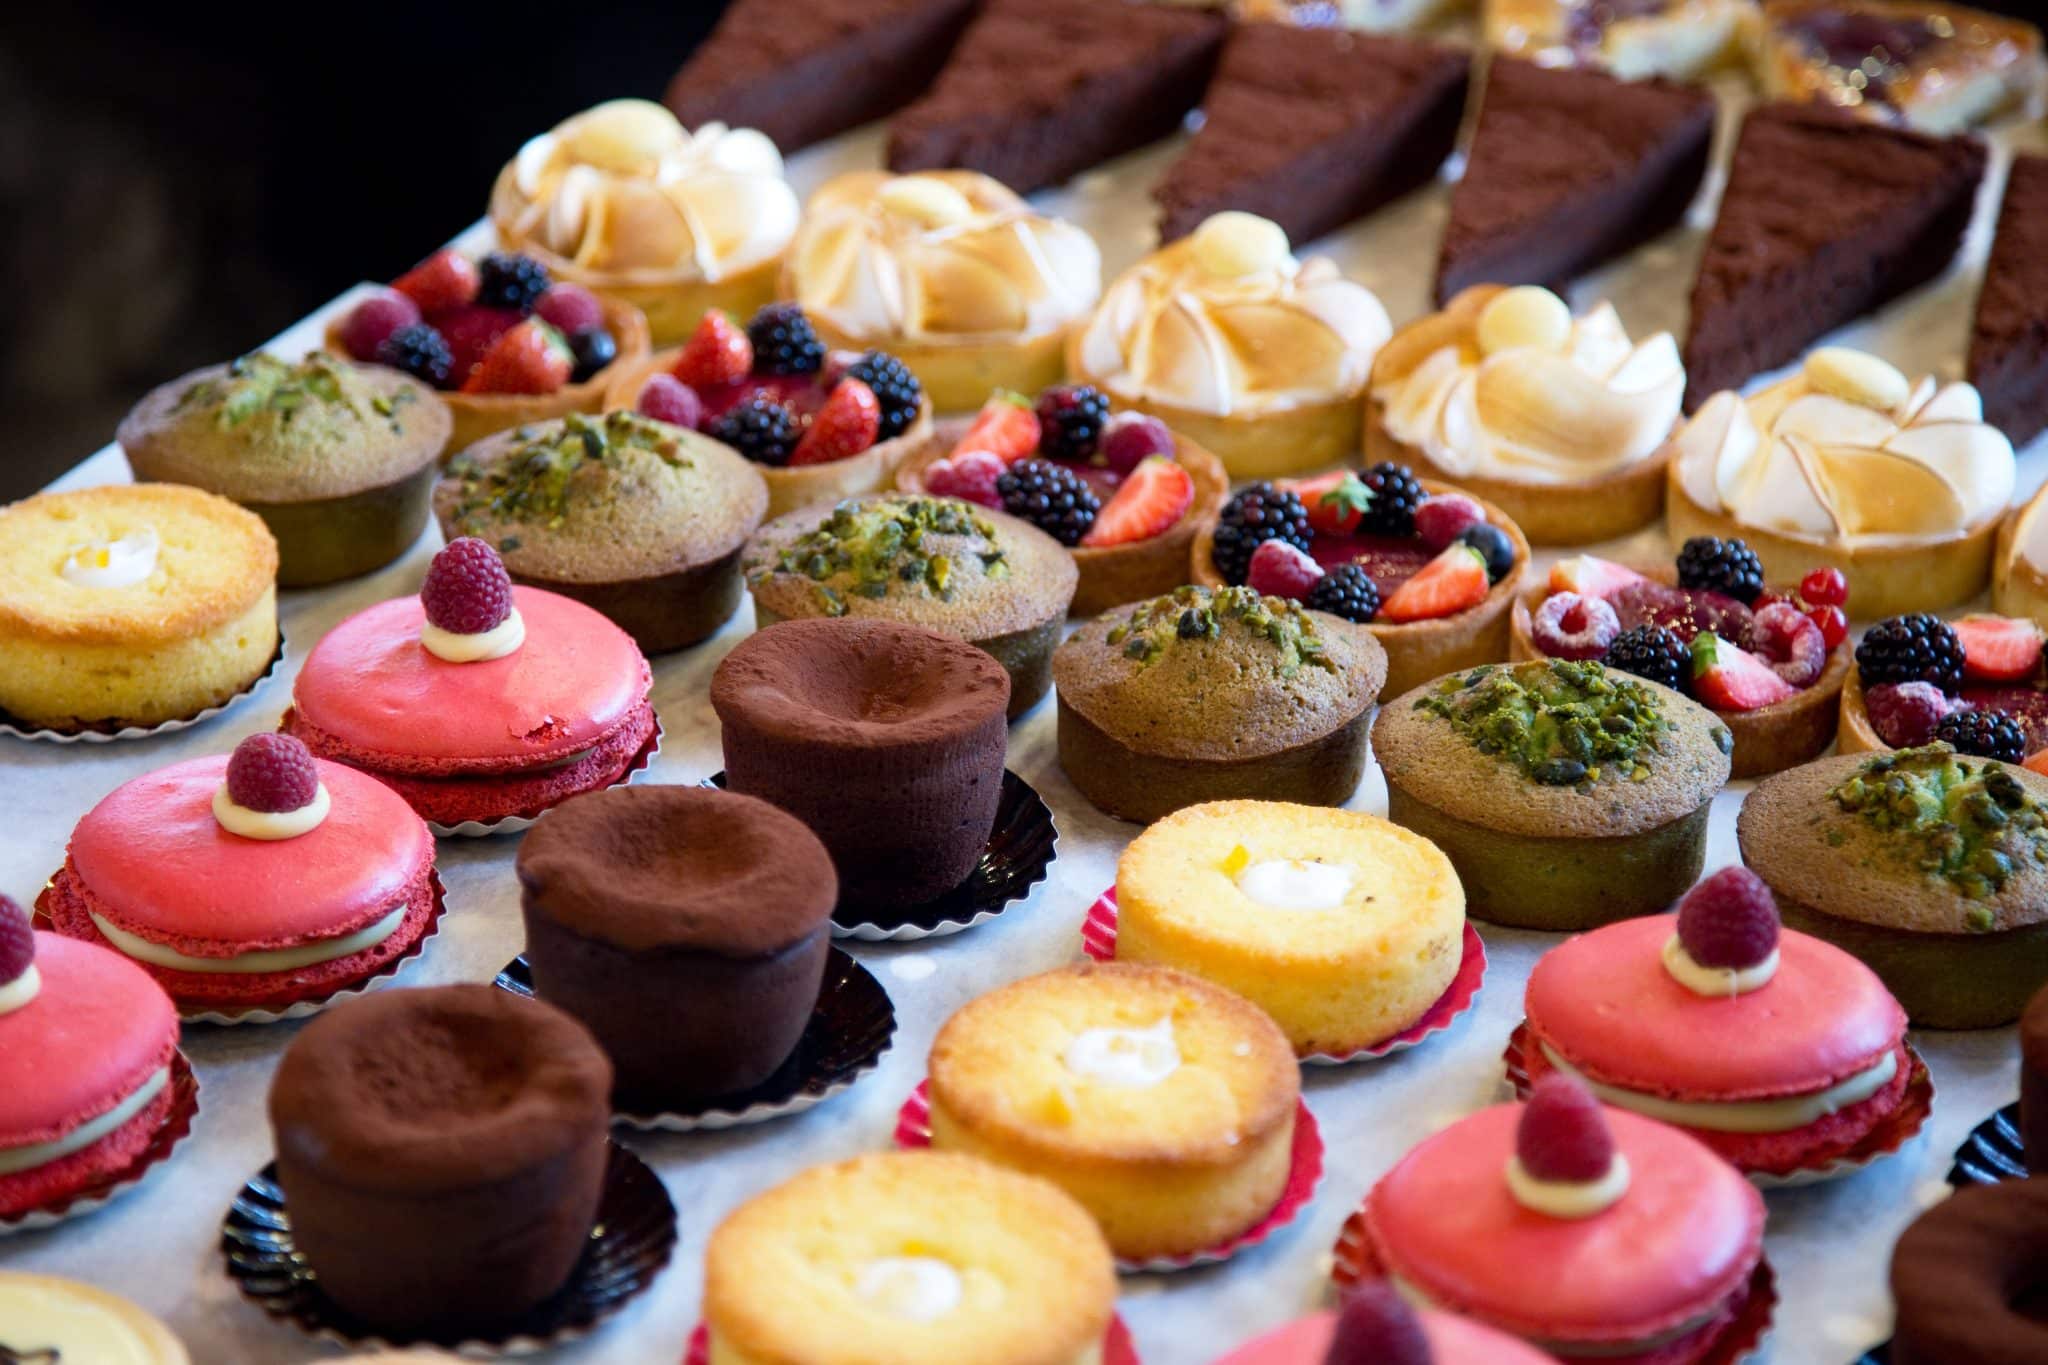 A selection of beautiful custom desserts in a bakery display